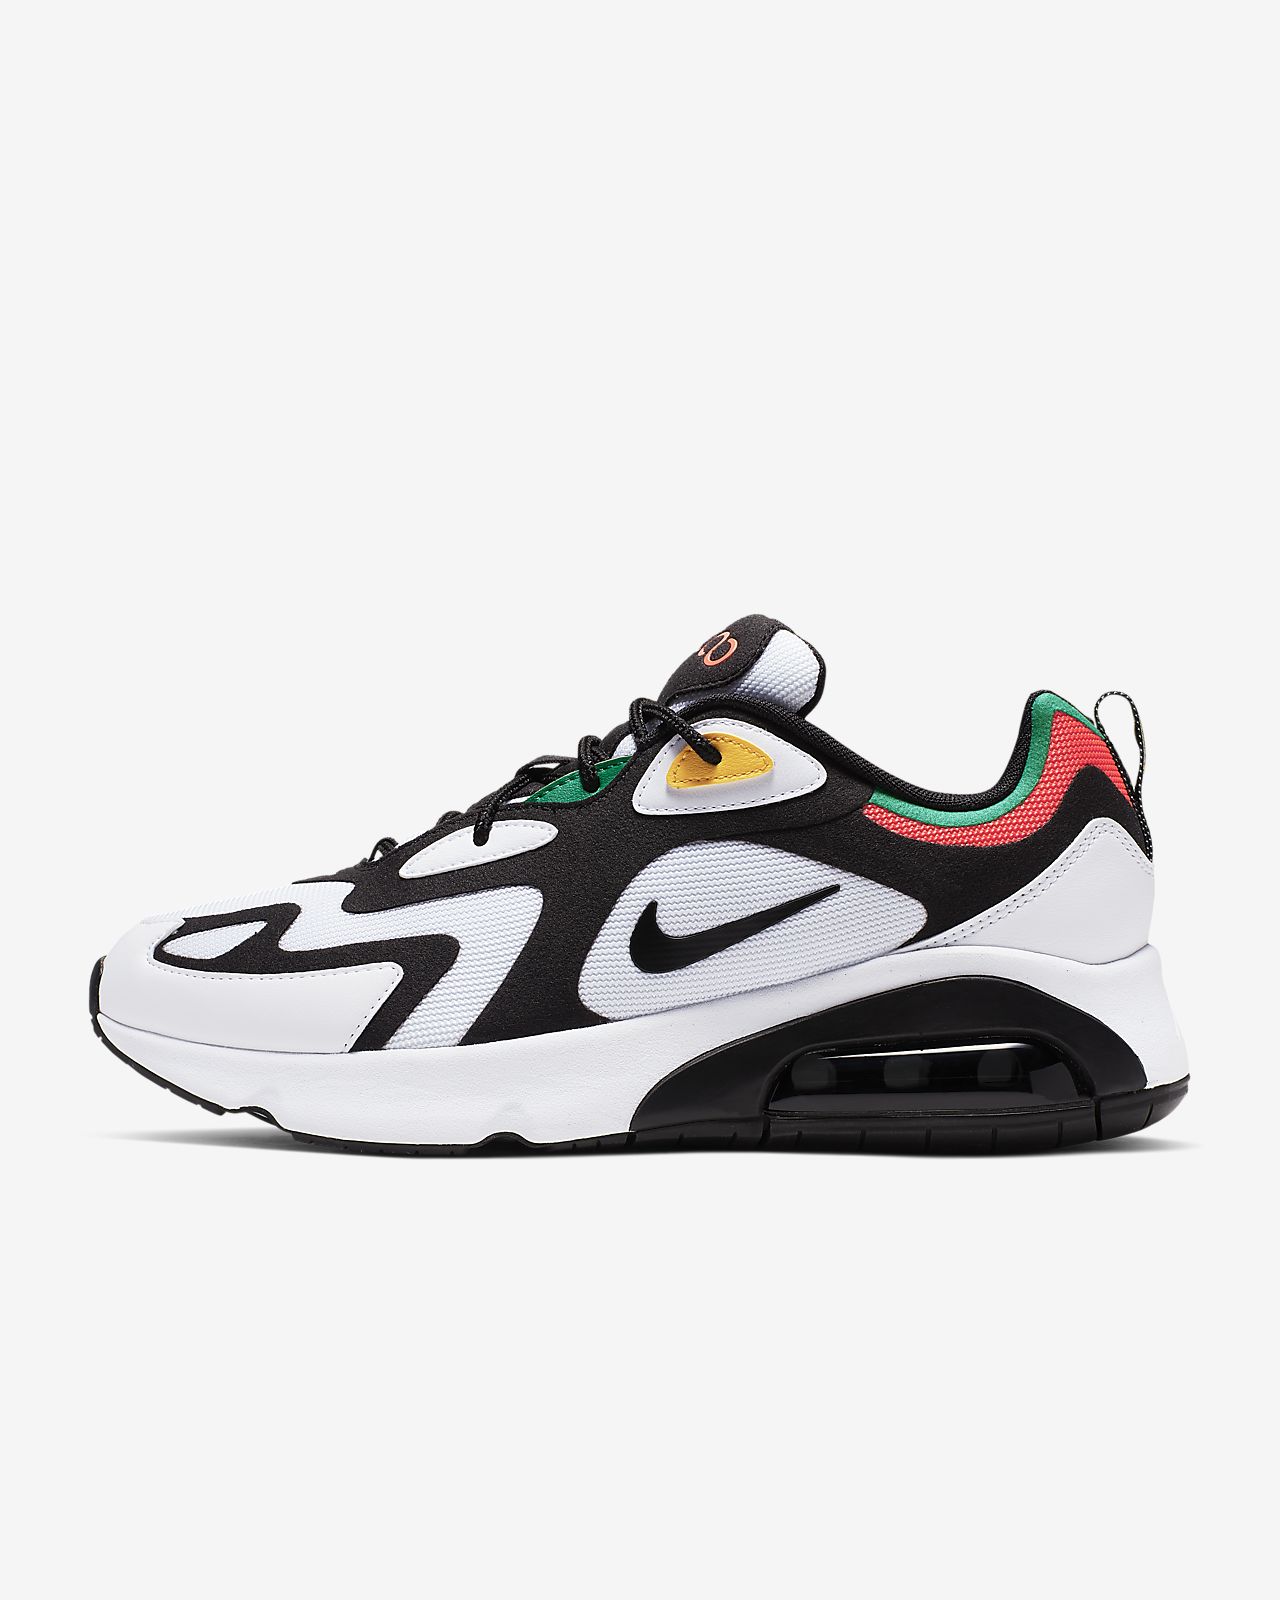 Nike Air Max 200 (2000 World Stage) Men 